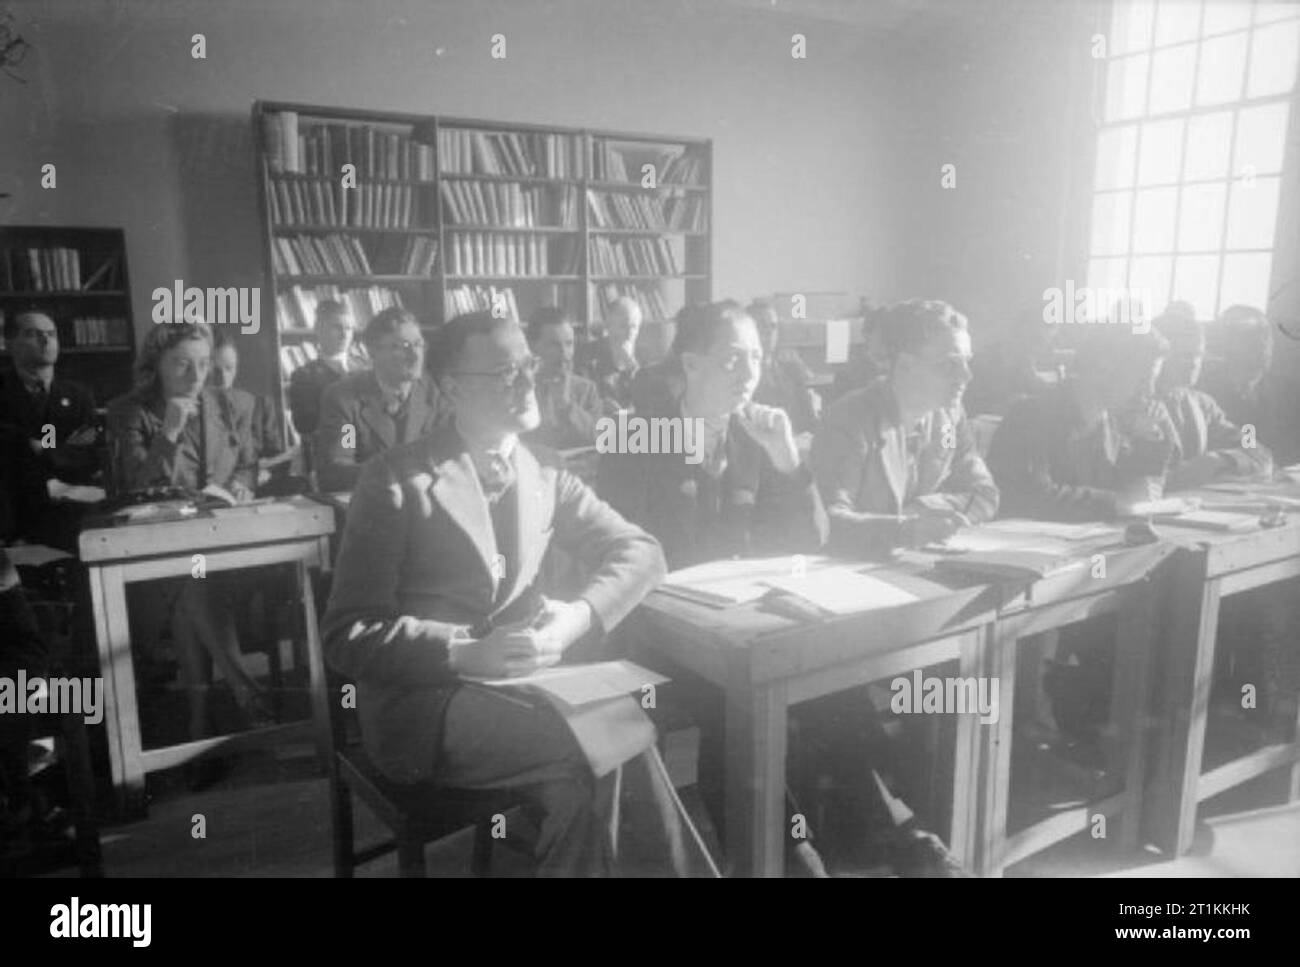 From the Services To Schoolmastering- Re-training at Goldsmith's College, London University, Nottingham, England, 1944 A class of ex-servicemen training to be teachers at Goldsmiths College (based at Nottingham University since the outbreak of war) listen to a lecture on English composition. The class is led by Dr Lewis, the Vice-Principal of Goldsmiths College (not pictured). Stock Photo